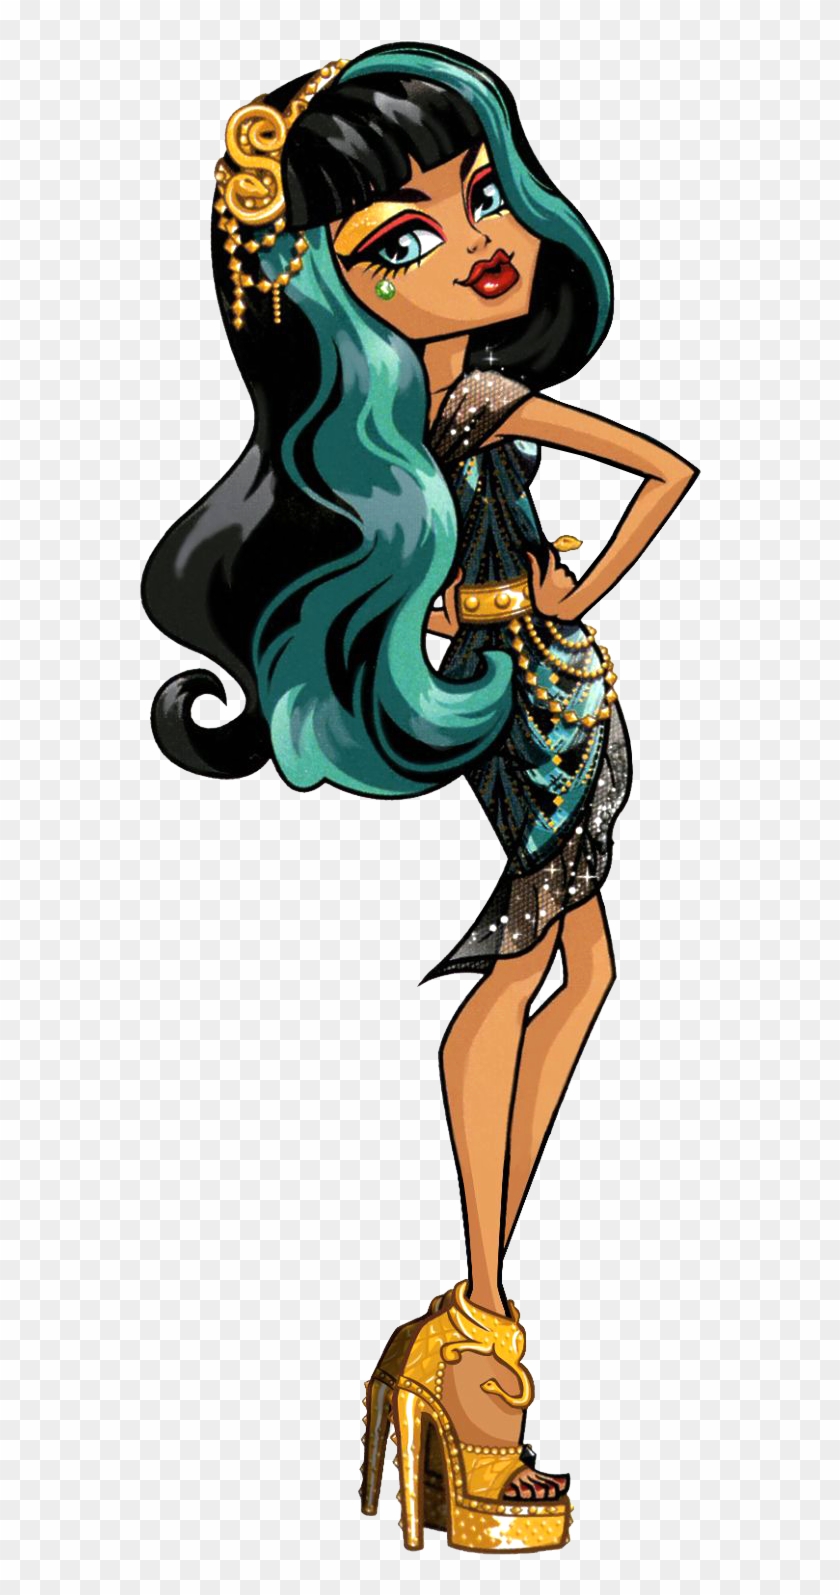 Cleo De Nile Is The Daughter Of The Mummy - Monster High Cleo Art #1356934